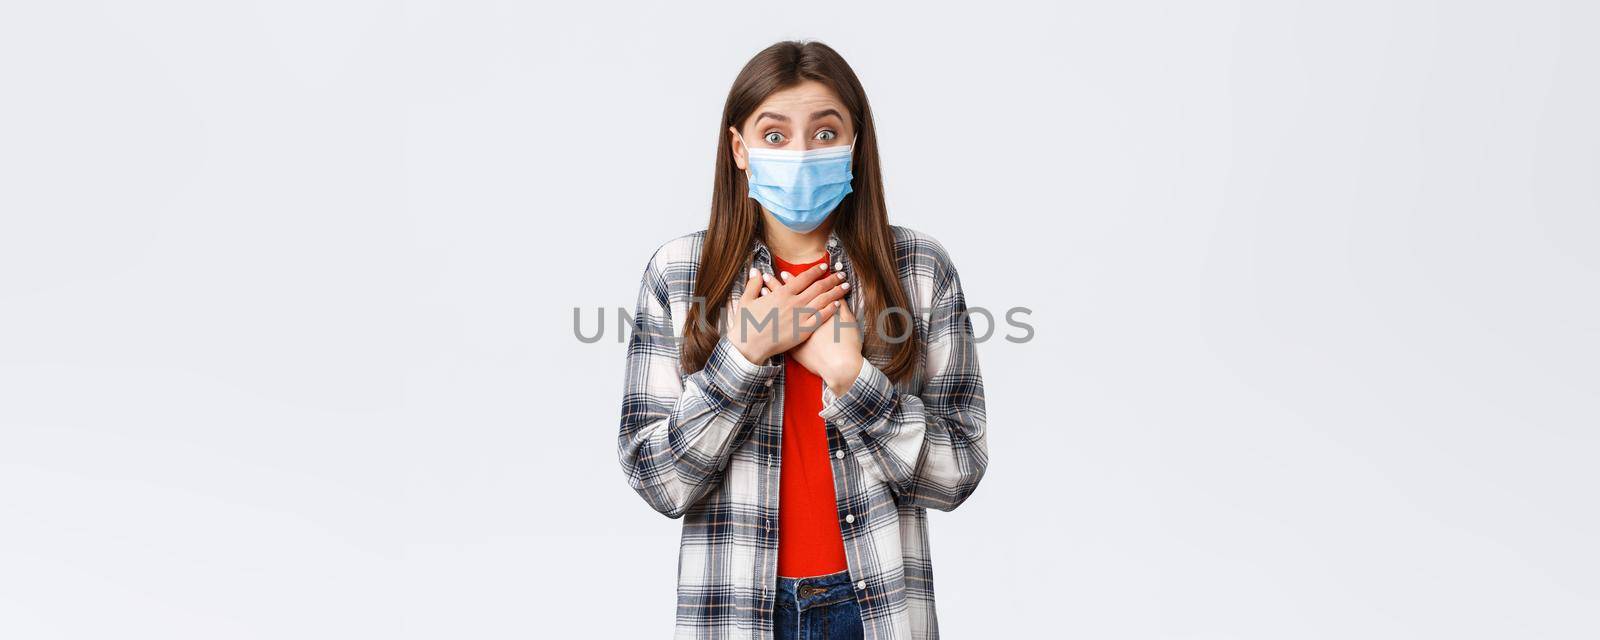 Coronavirus outbreak, leisure on quarantine, social distancing and emotions concept. Touched happy cute girl in medical mask, press hands to chest looking at something beautiful, hear good news.